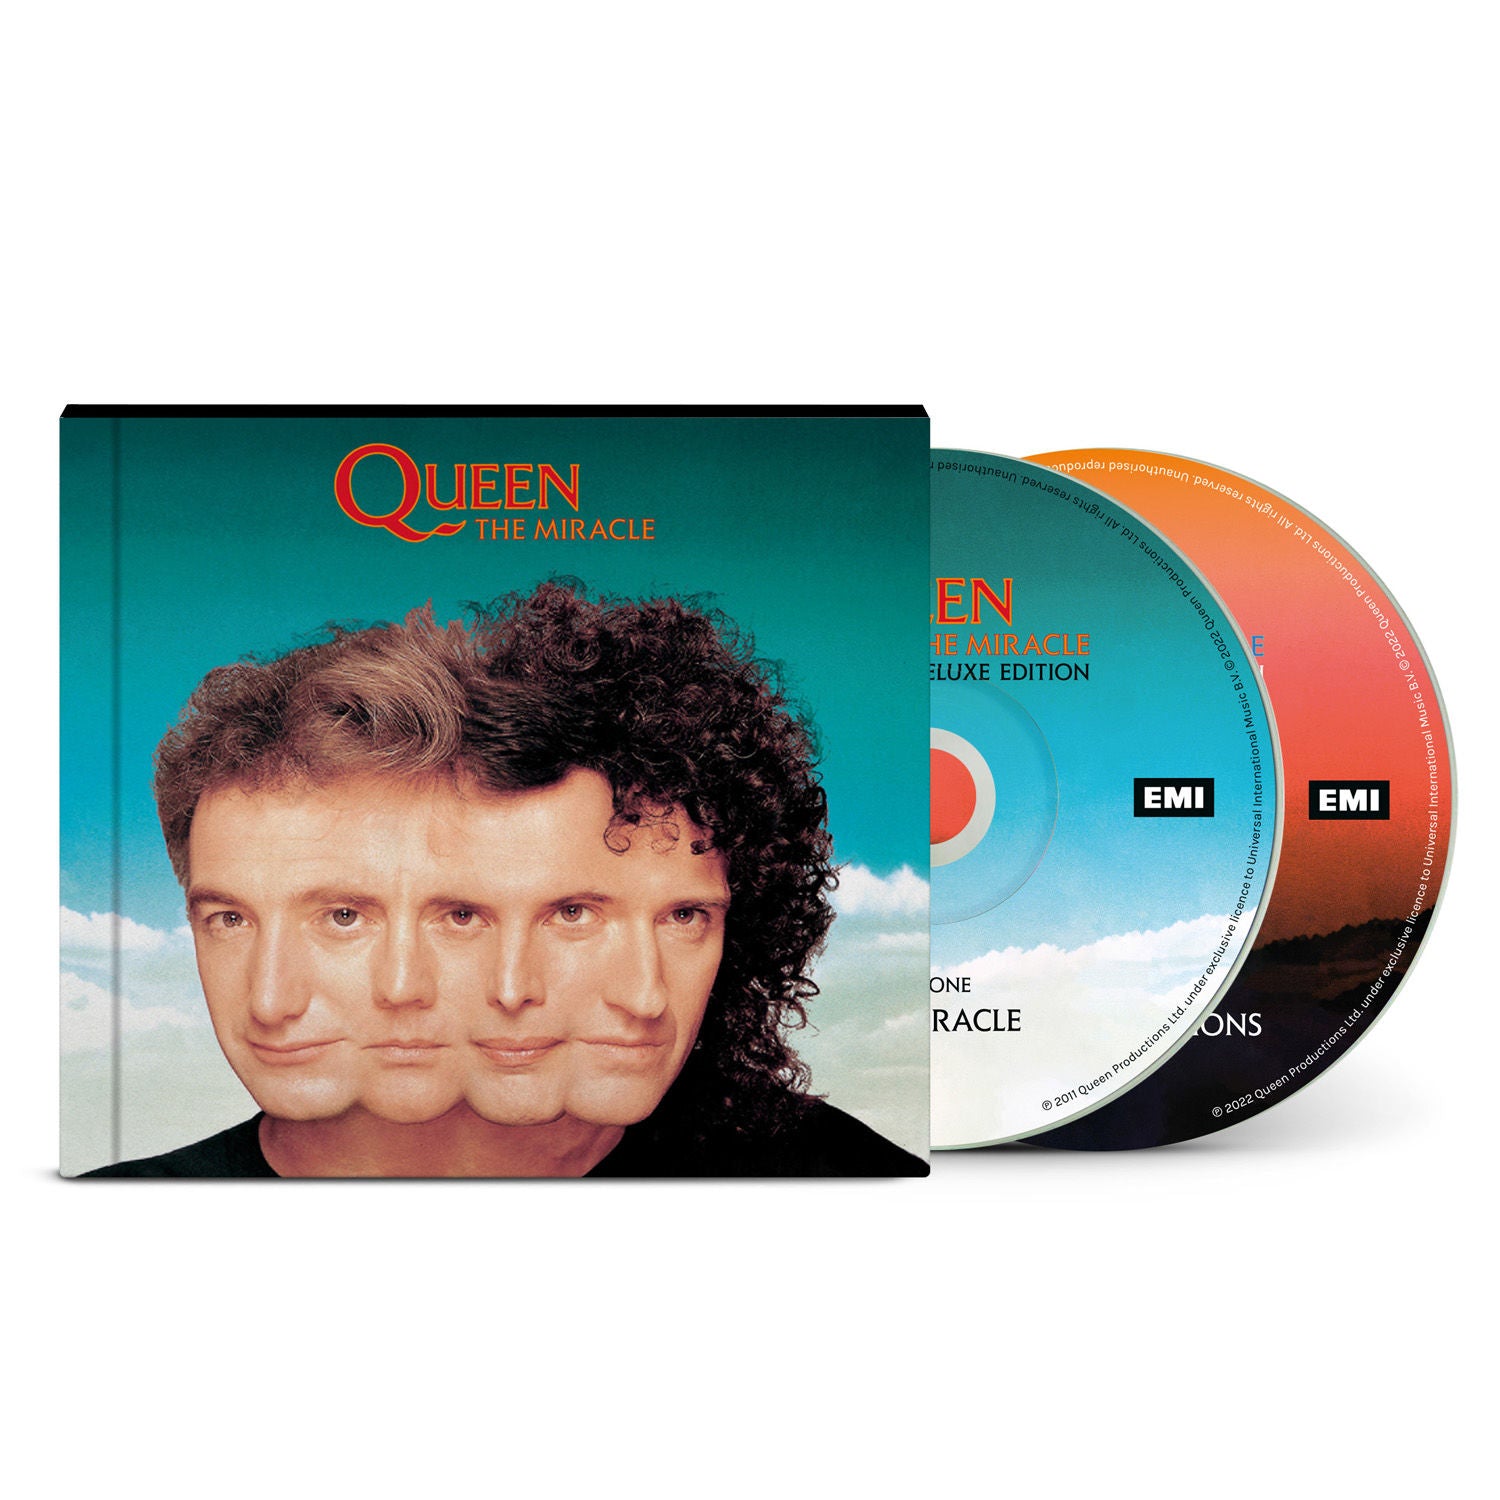 Queen, Maurice Béjart - ‘The Miracle’ Deluxe Collector’s Edition